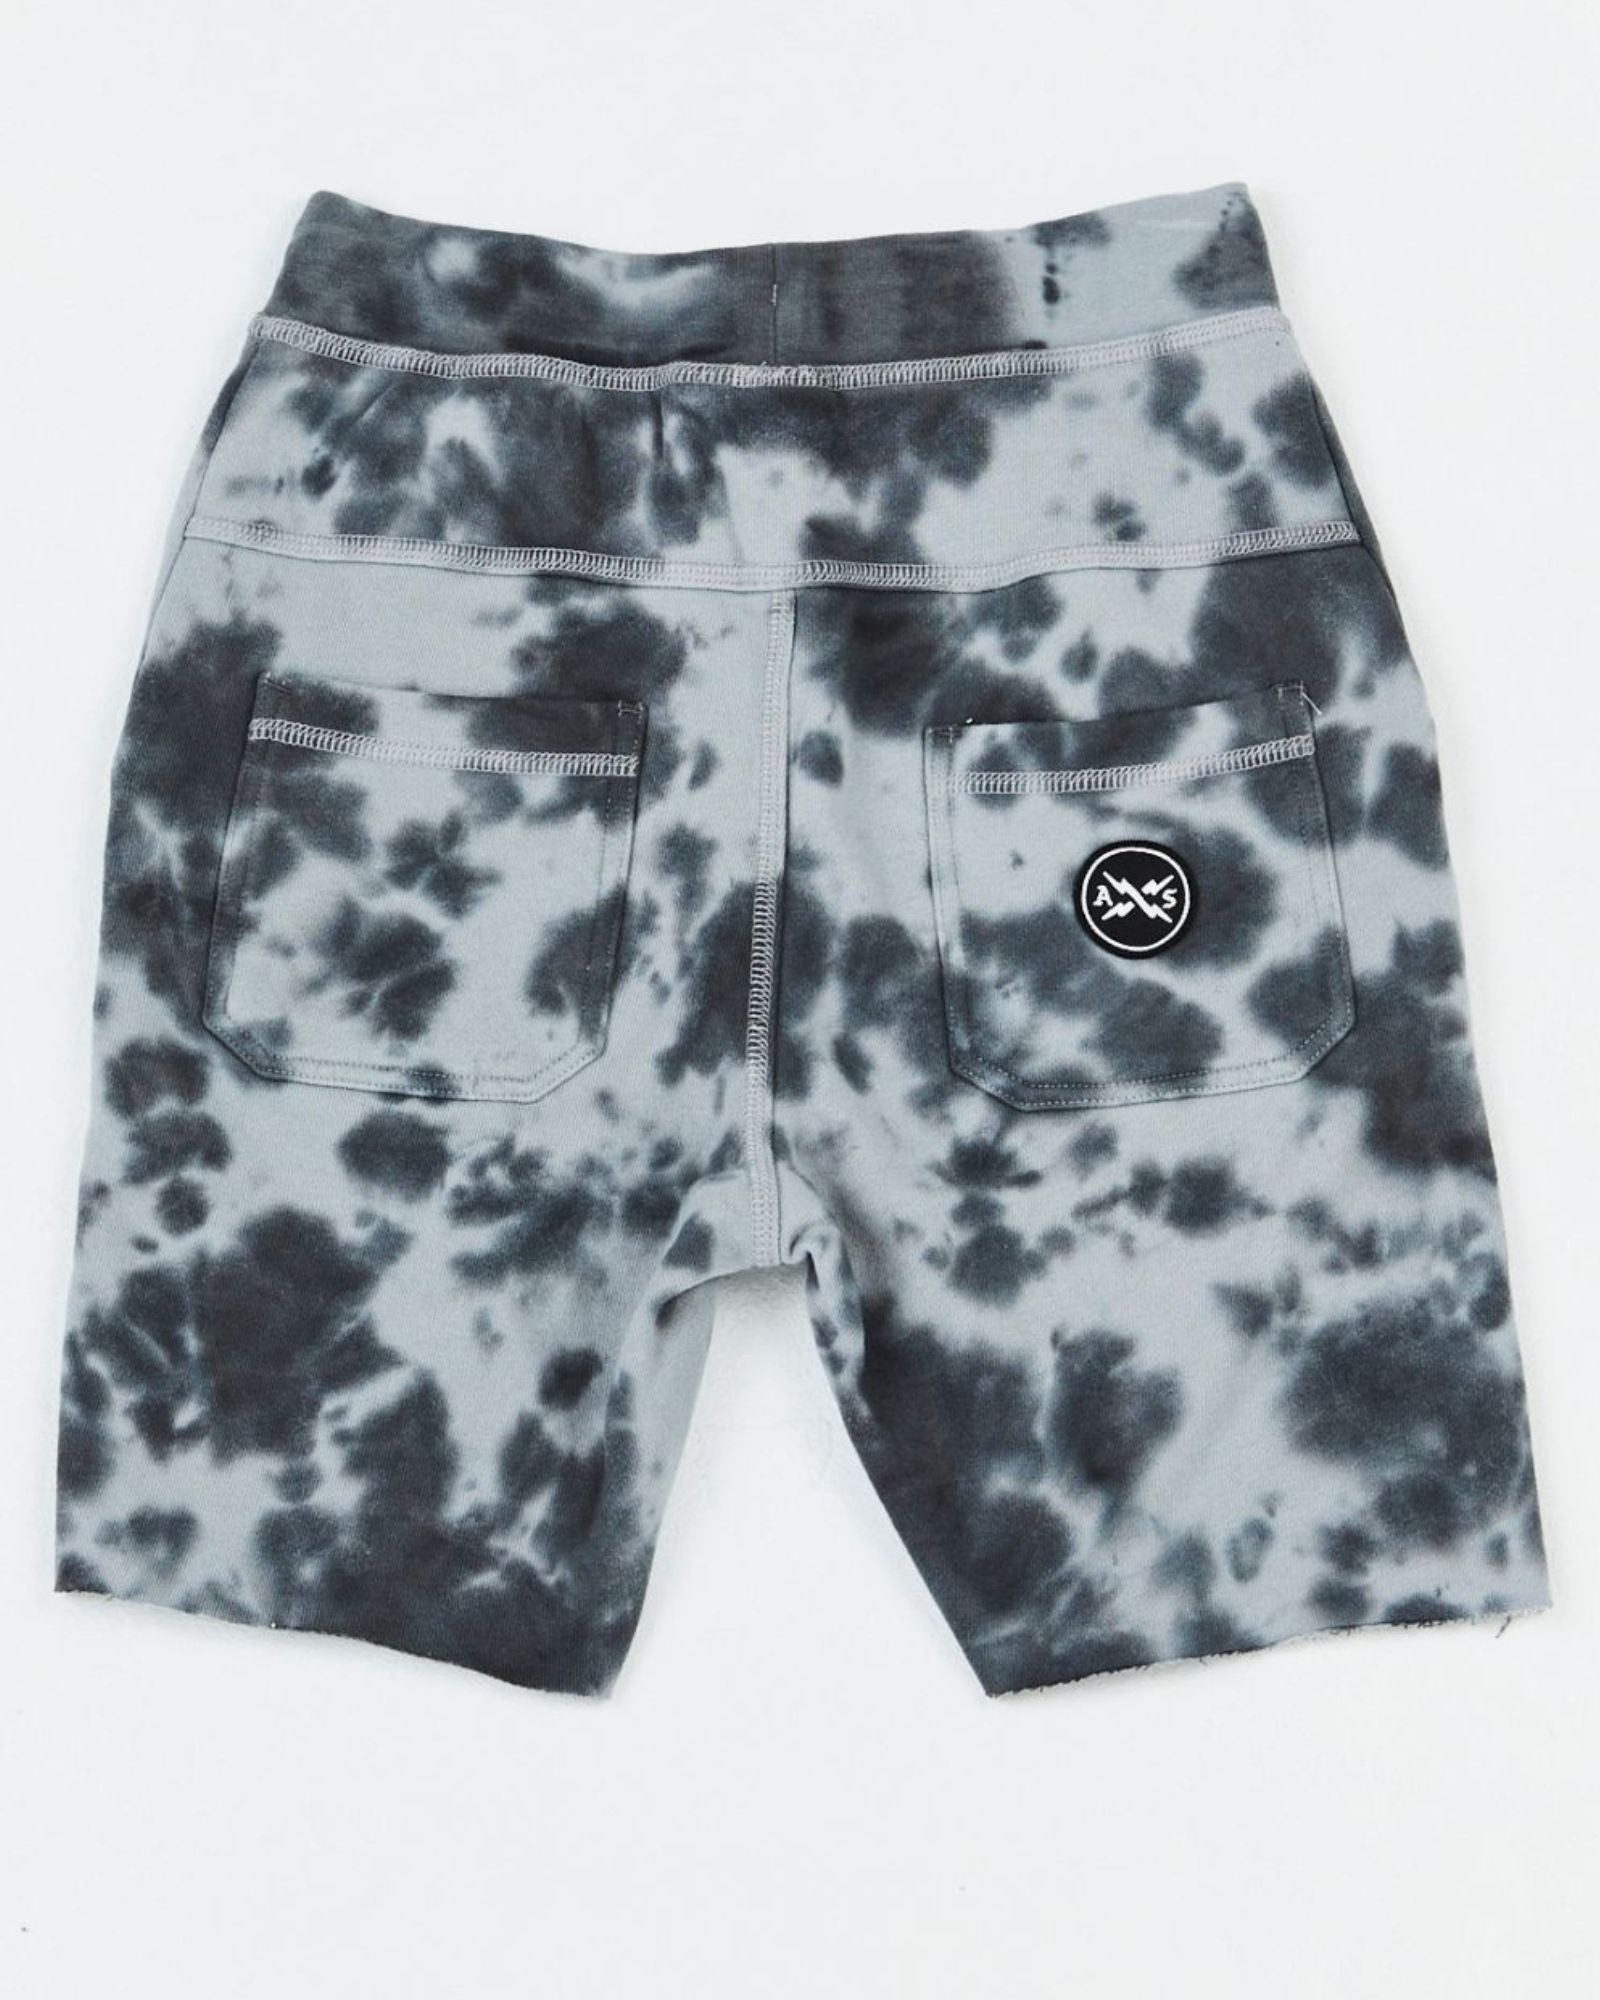 Alphabet Soup's Teen Alley Oop Short in Grey tie dye for boys aged 8-16. Featuring 100% Cotton French Terry, relaxed fit, adjustable drawcords, raw hems and pockets.